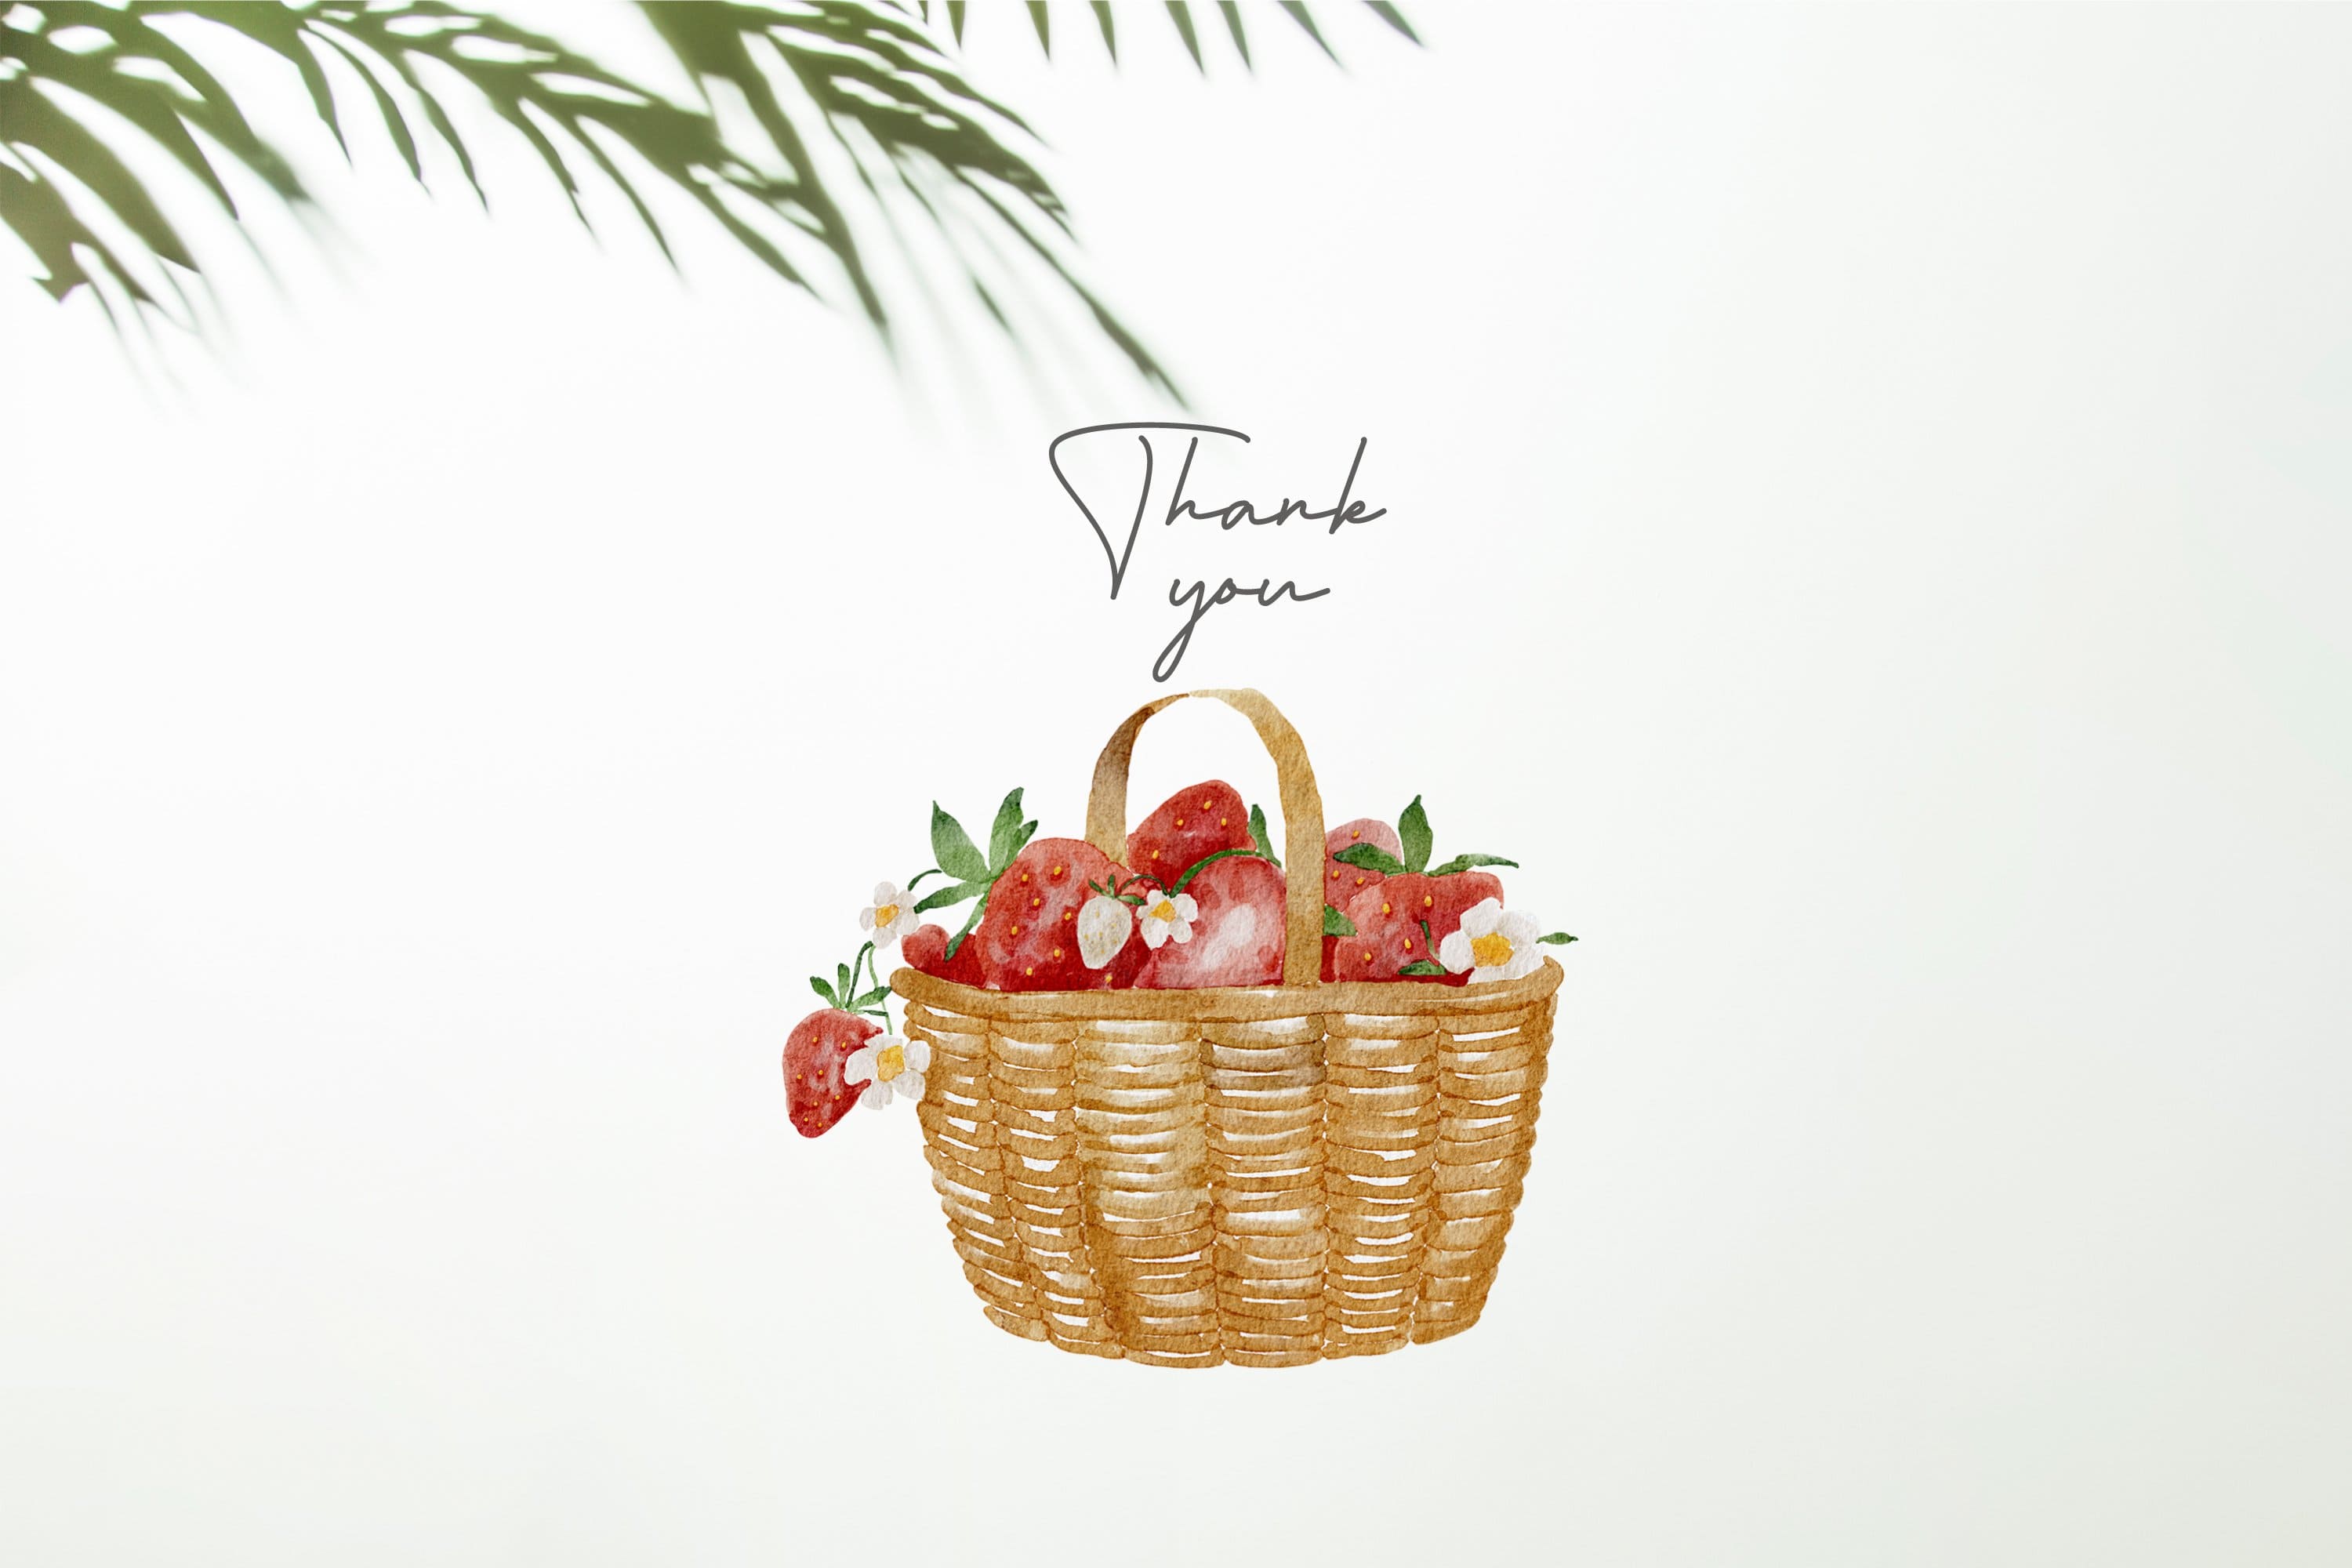 Gratitude slide with a basket of strawberries.